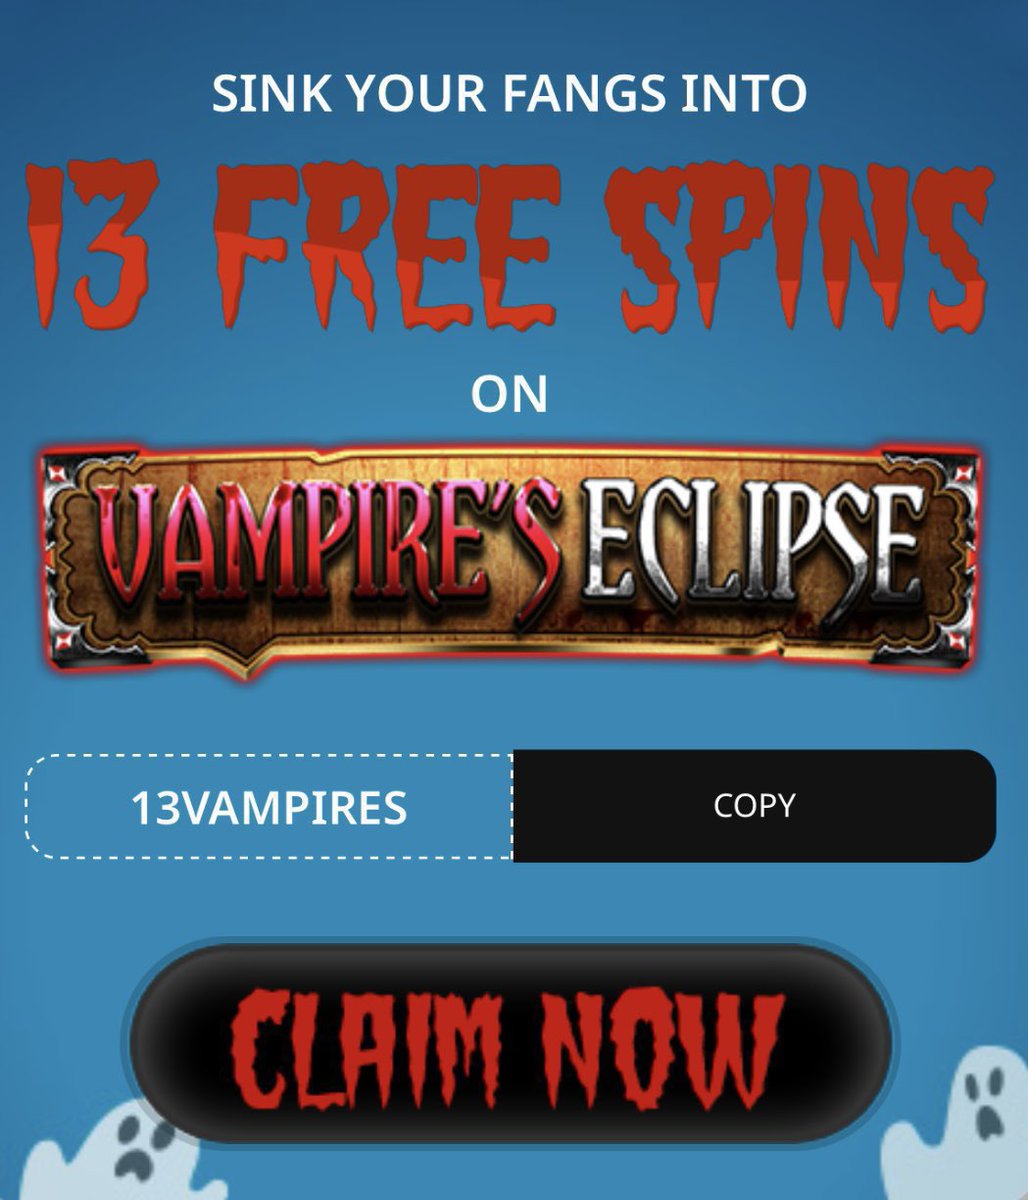 Join Punt Casino &amp; get 13 NO DEPOSIT FREE SPINS &#127920;

Join &#129499;‍♂️ 

